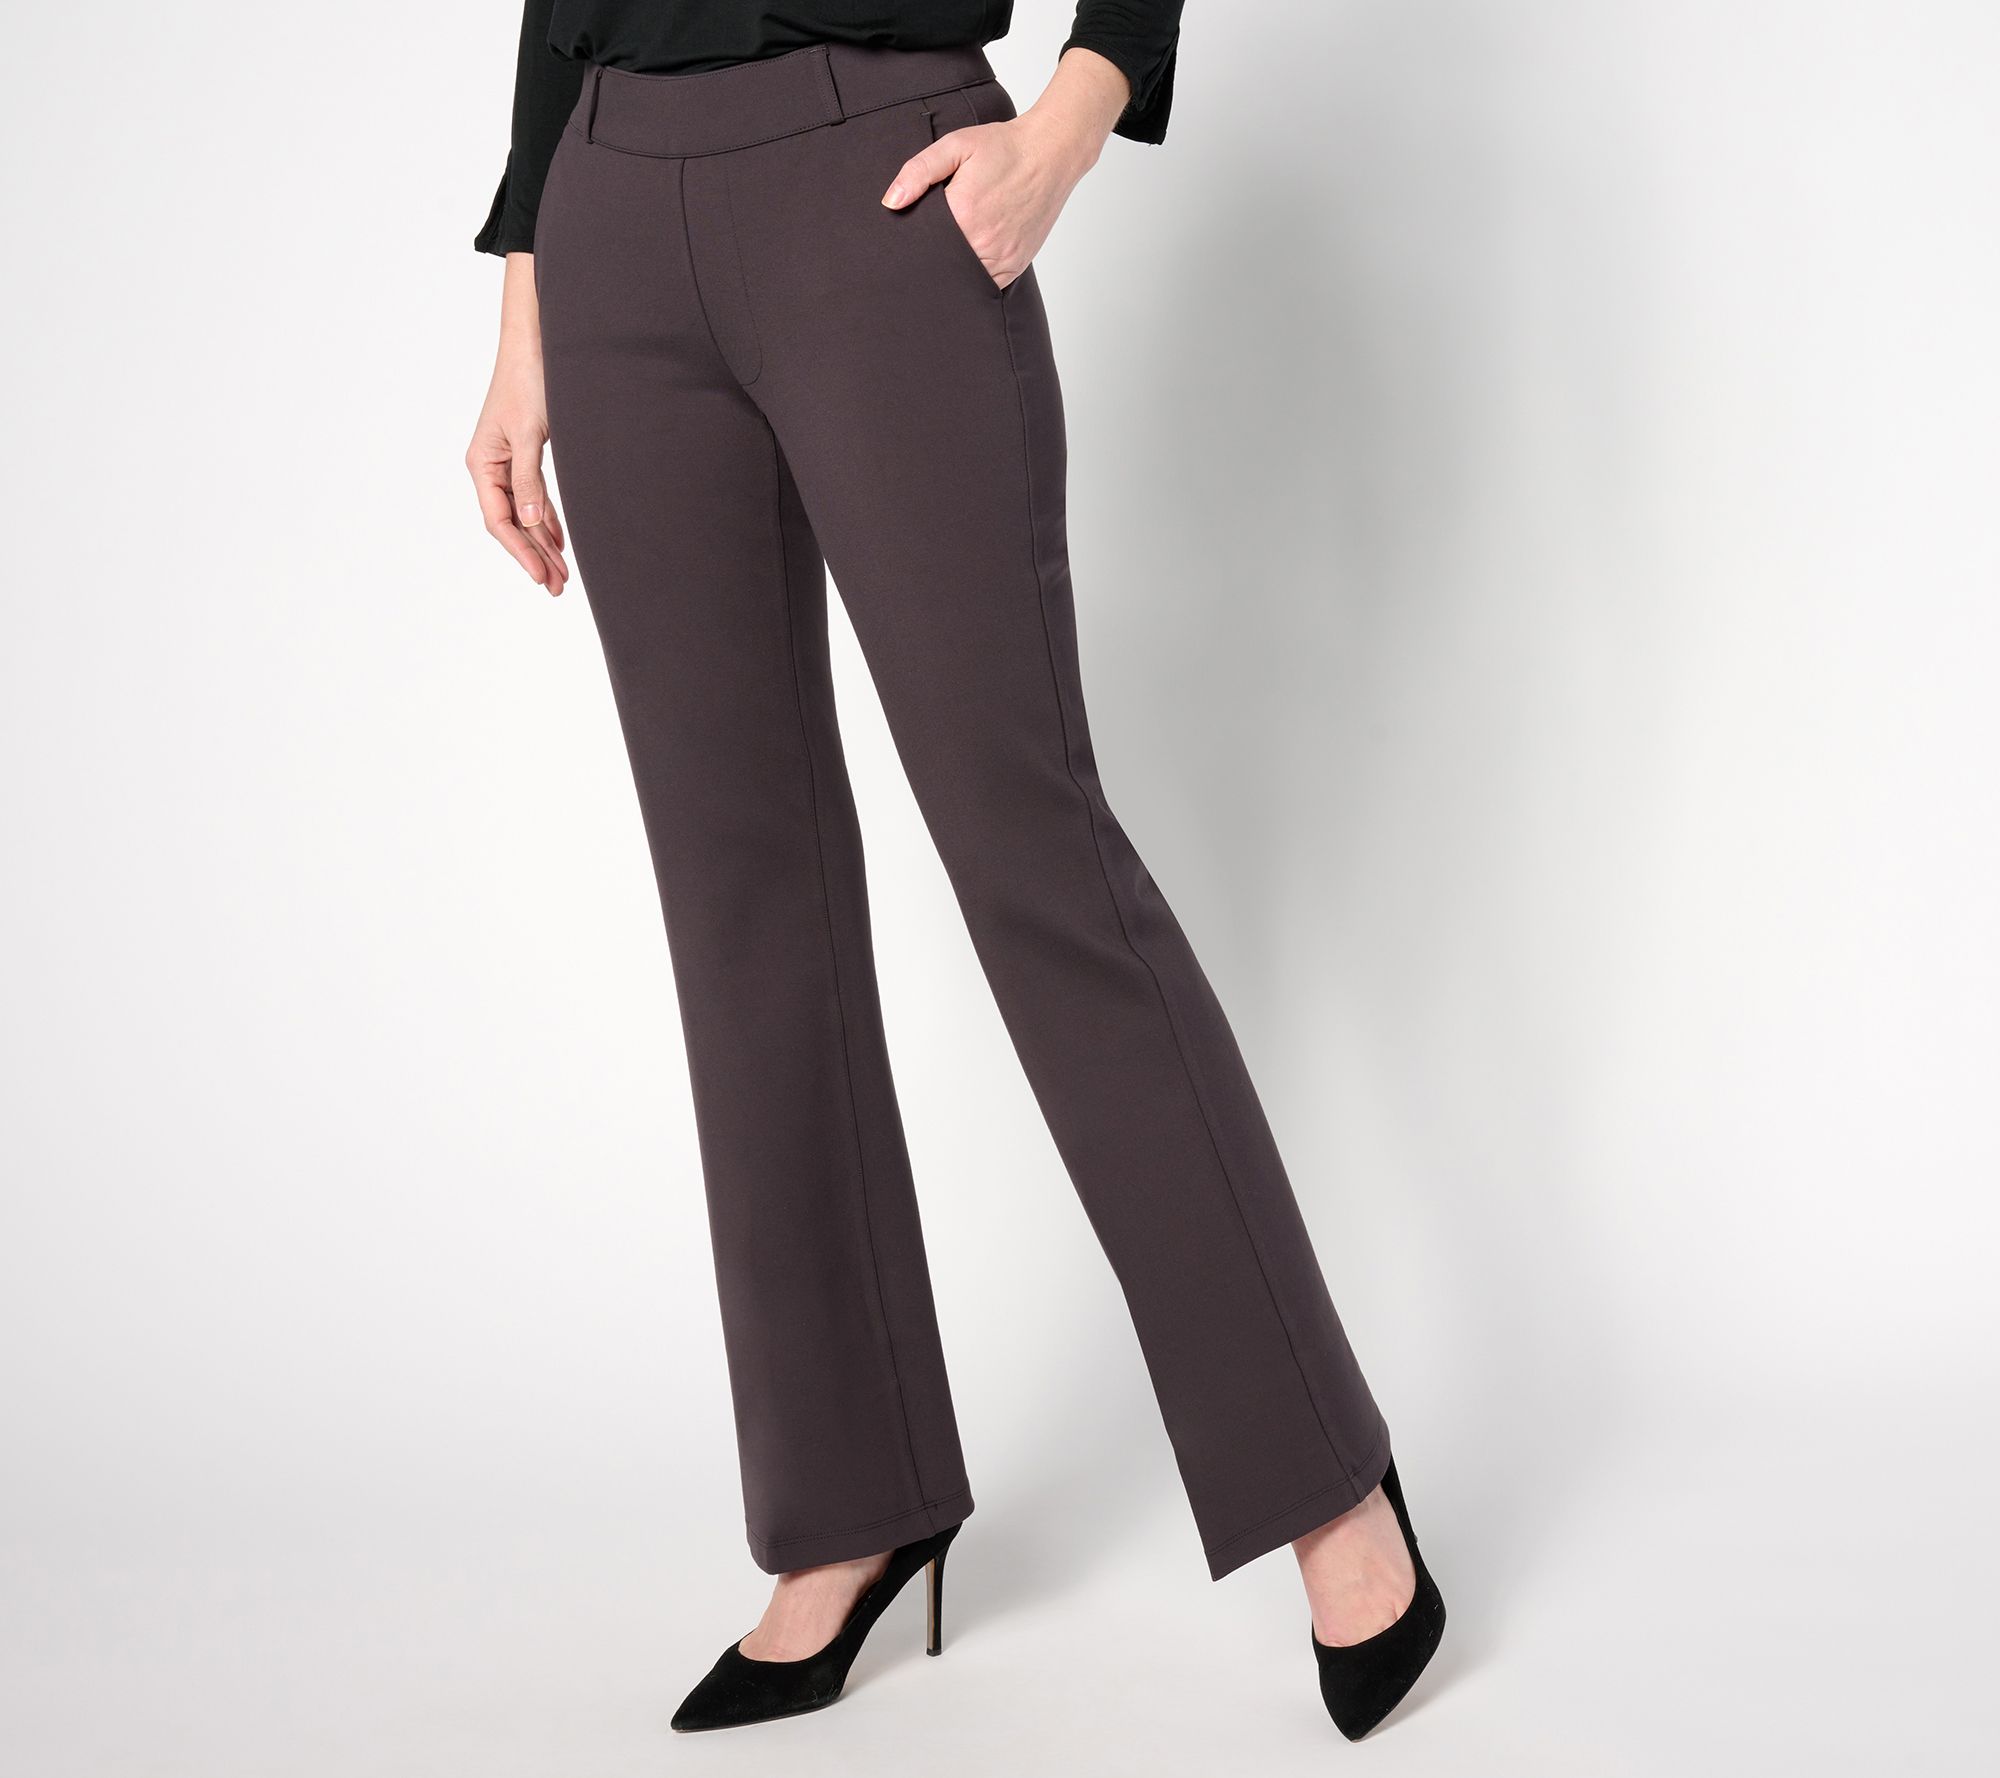 Clothing & Shoes - Bottoms - Pants - NYDJ Marilyn Straight 5 Pocket Ponte  Pant - Online Shopping for Canadians